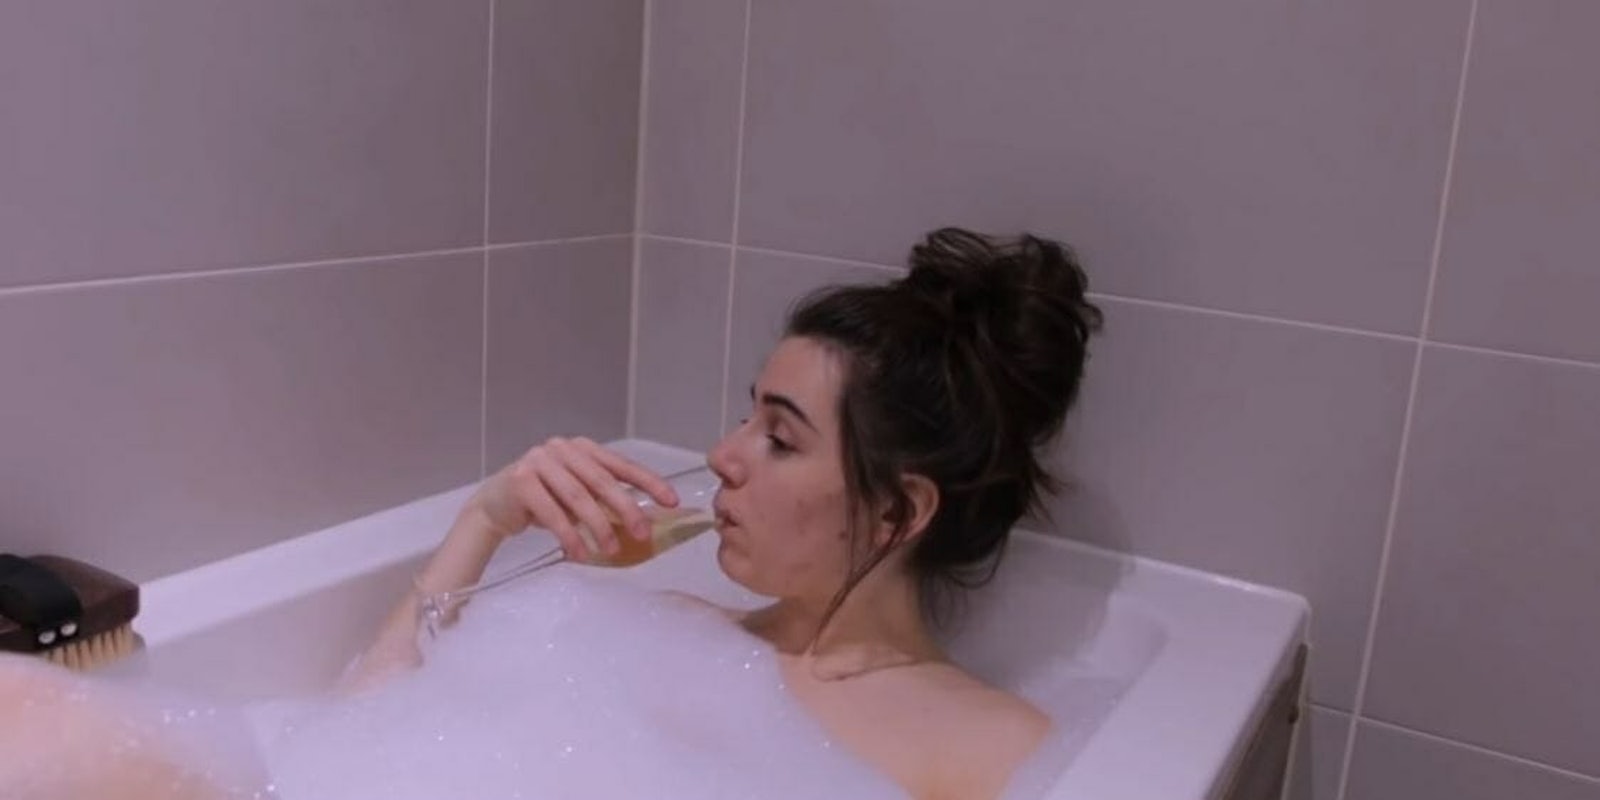 Doddleoddle YouTube party song